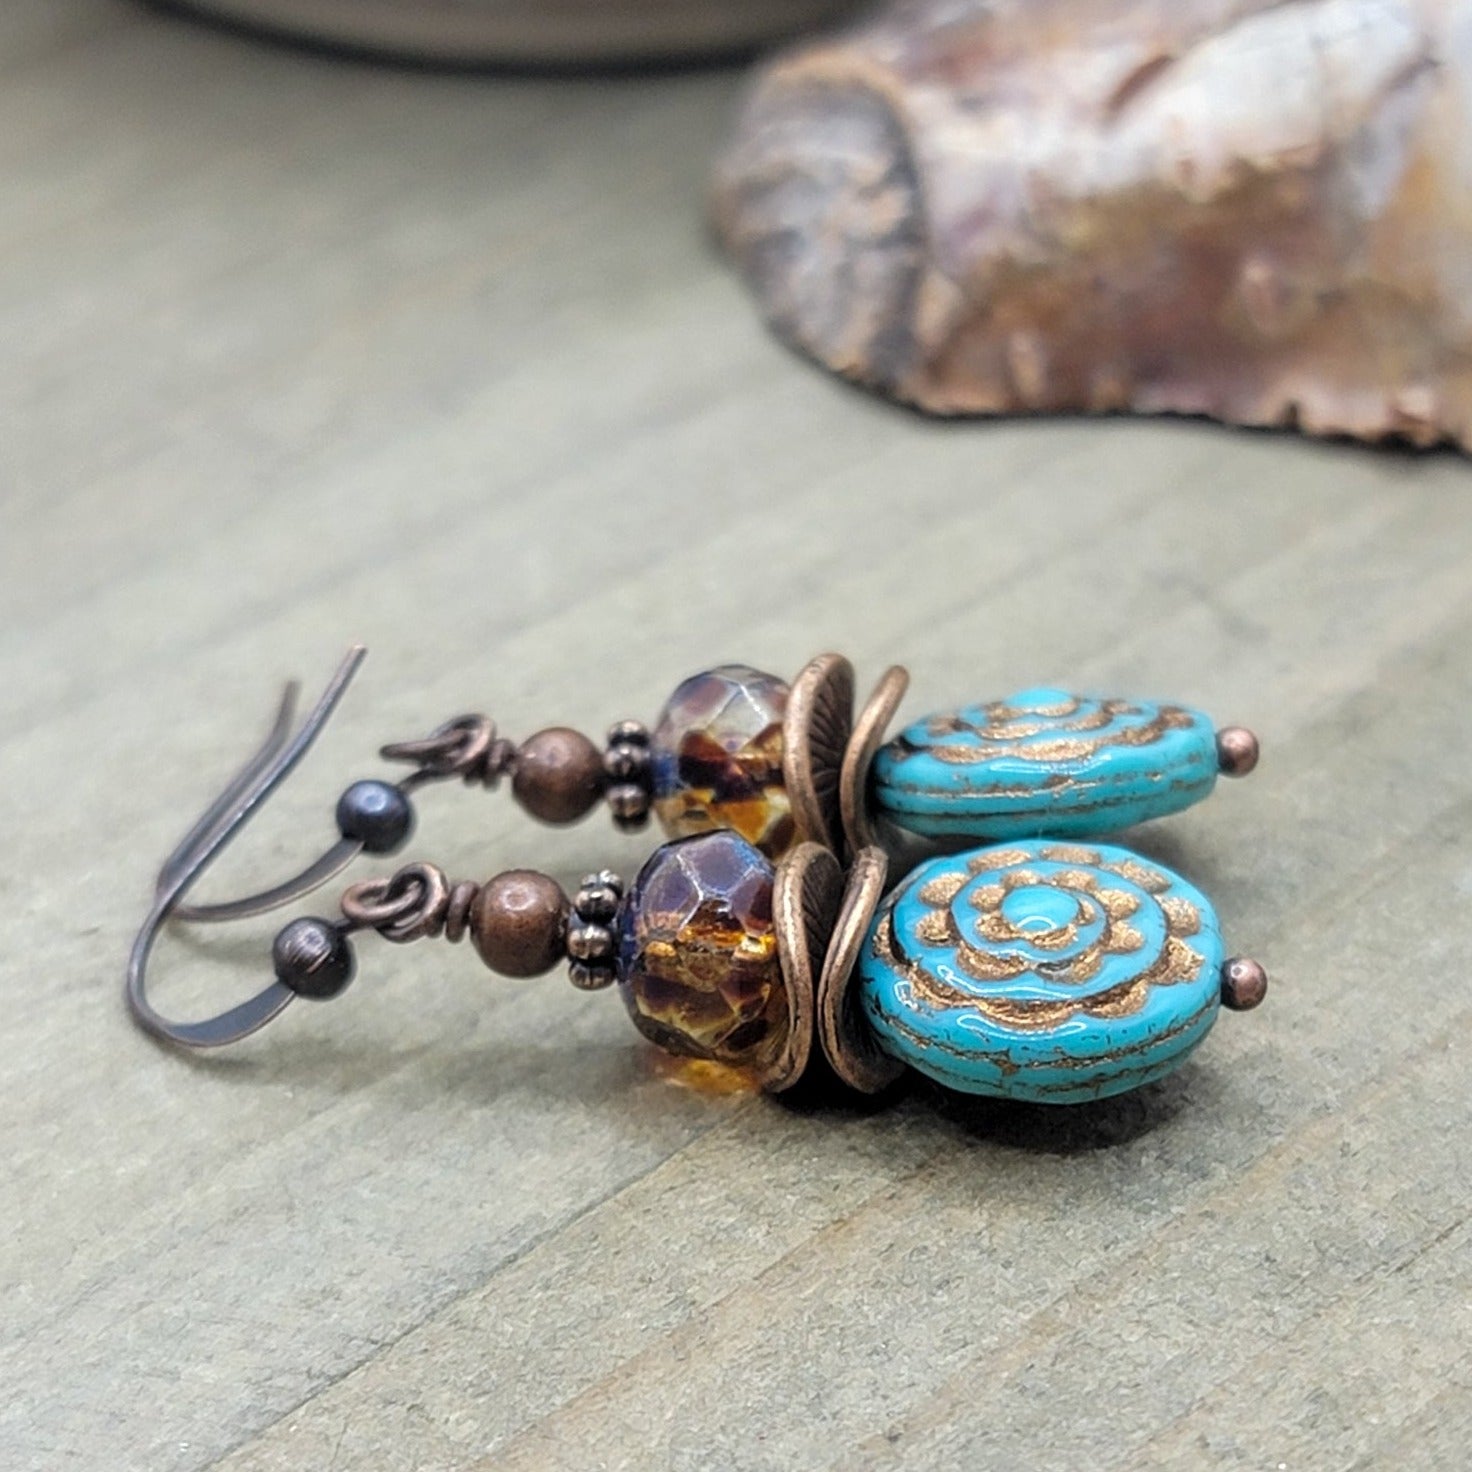 Rustic Turquoise and Copper Drop Earrings - Nicki Lynn Jewelry